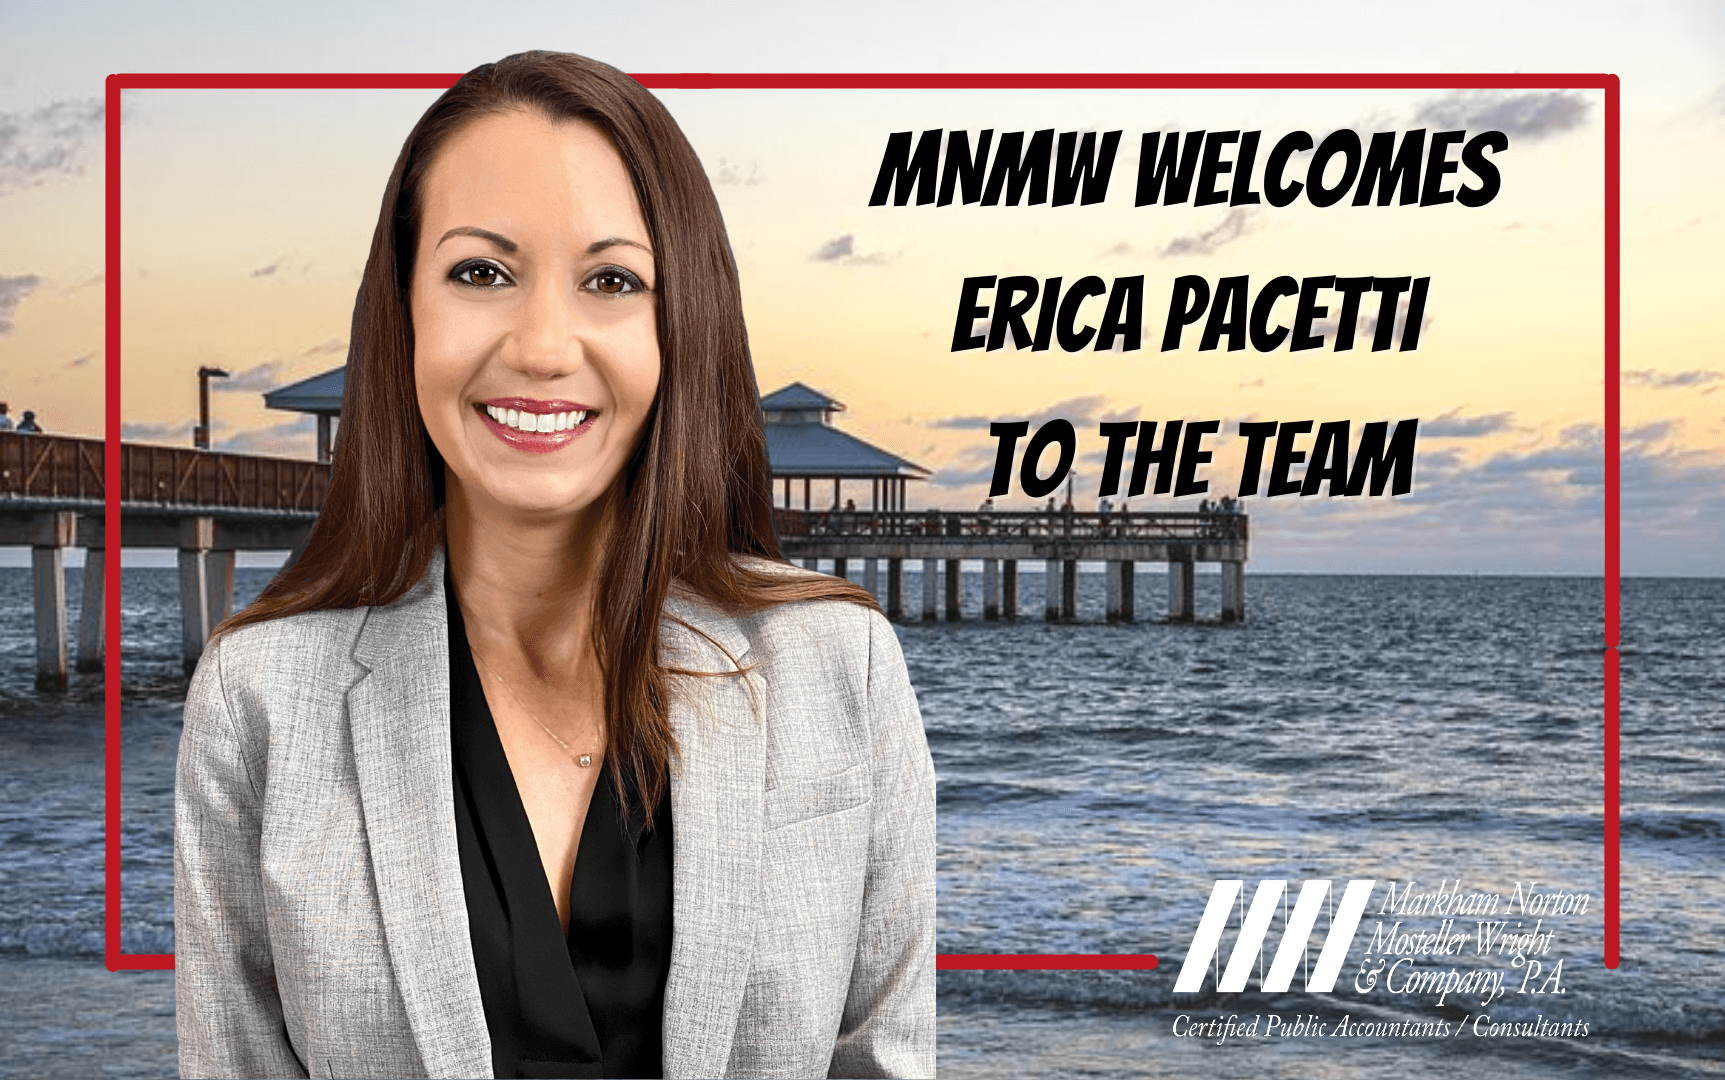 Erica Pacetti Joins MNMW